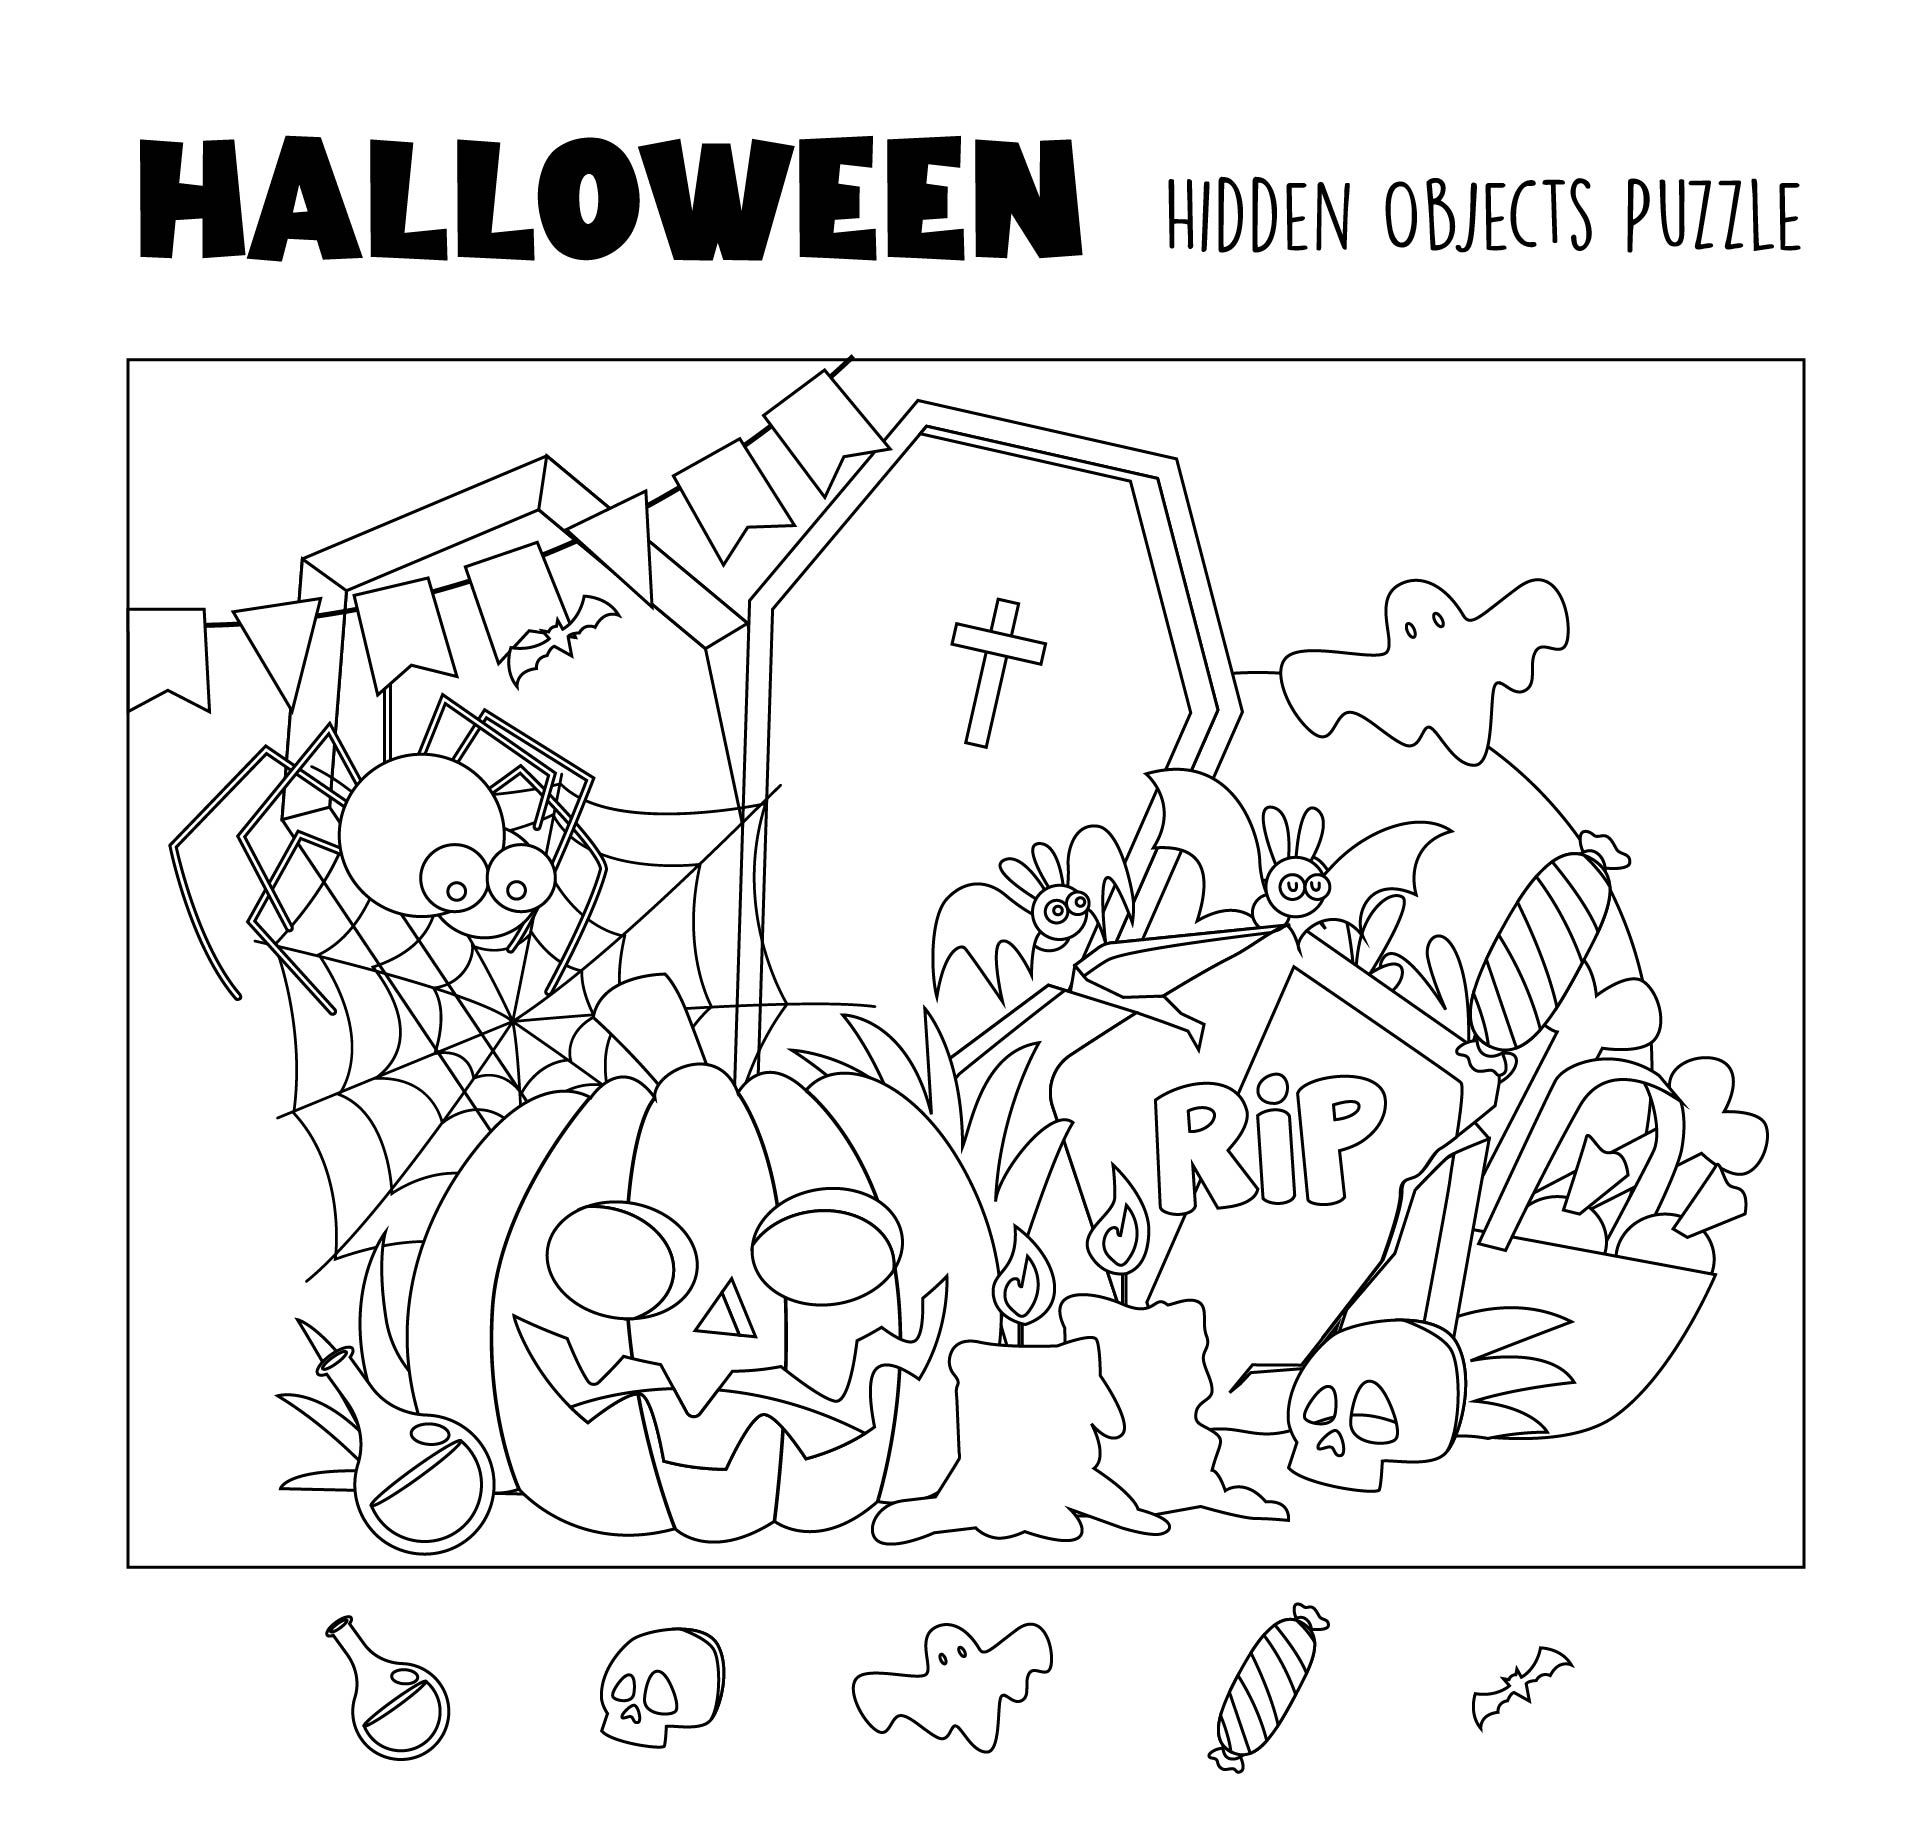 15 Best Printable Halloween Picture Search PDF for Free at Printablee